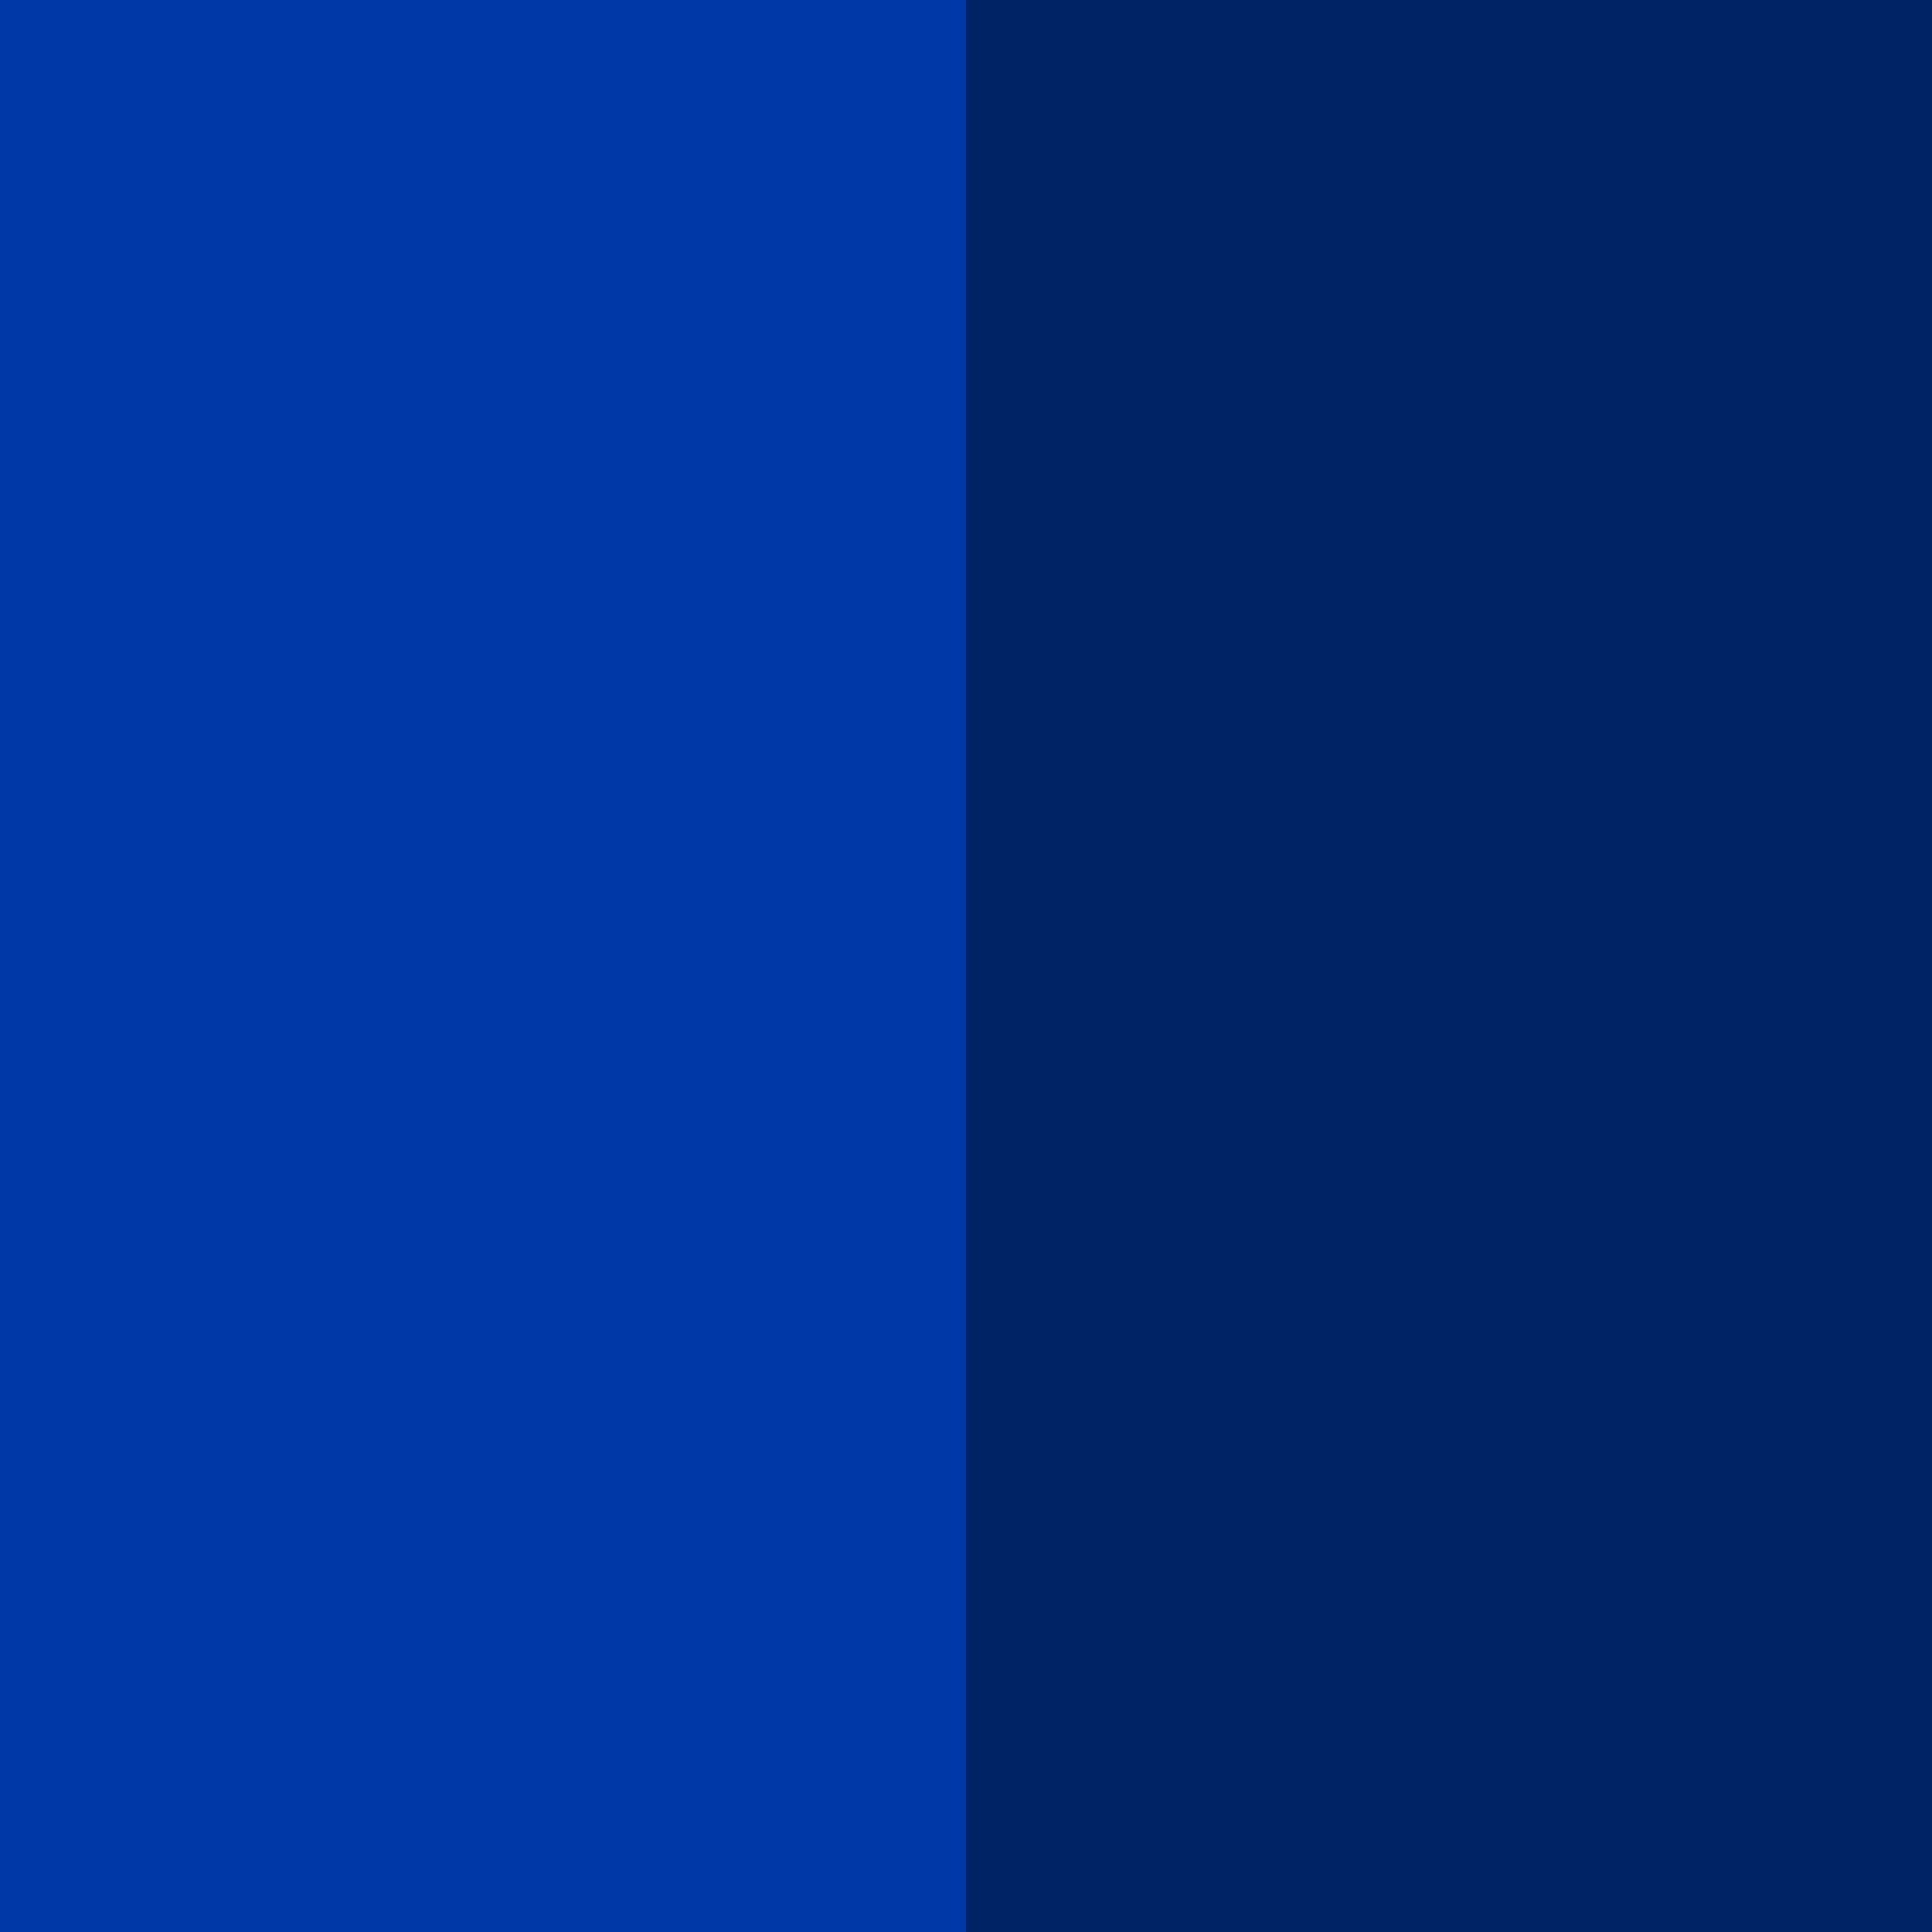 Two Color Wallpaper Free Two Color Background - Royal blue background, Royal blue wallpaper, Blue background